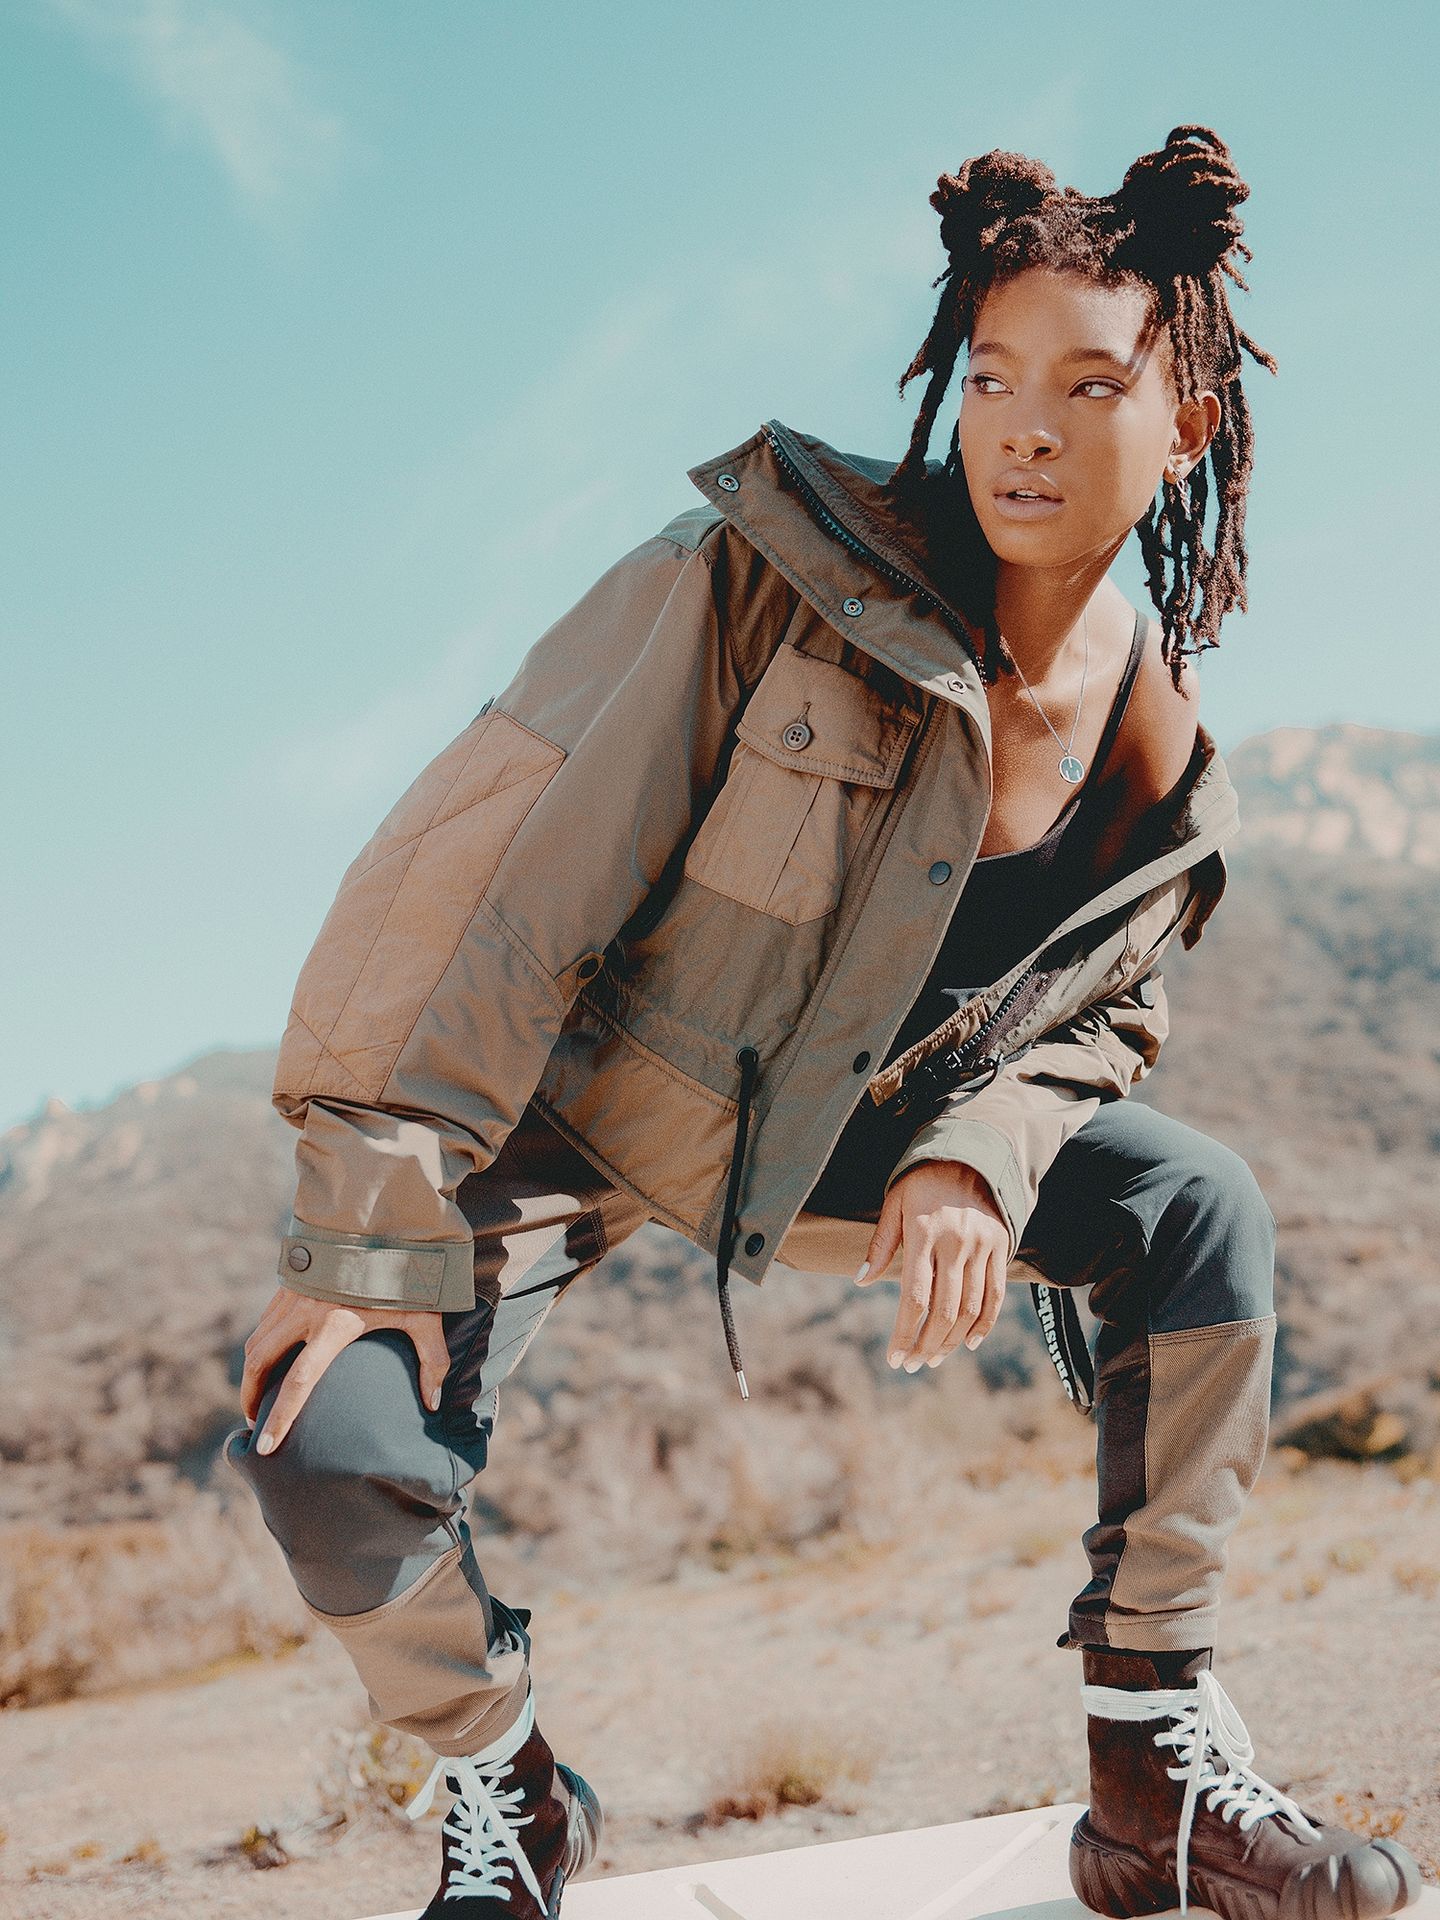 Willow Smith Stars in This New Fashion Campaign (8 Photos)